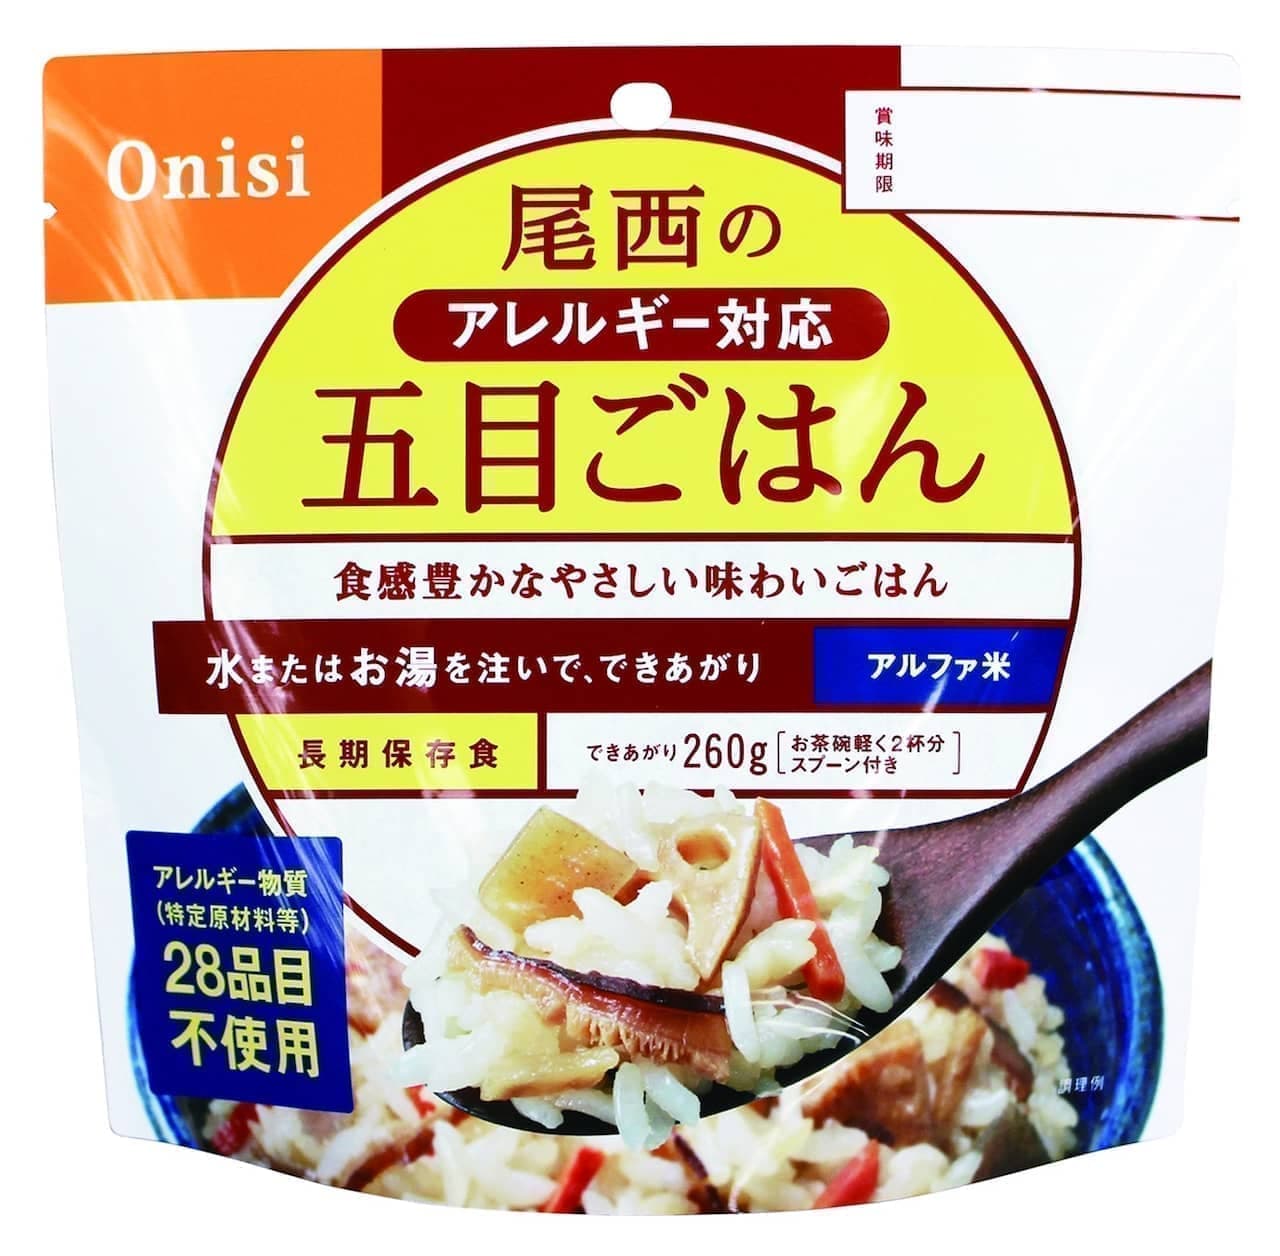 "Allergy-friendly Gomoku rice" and "Onishi dry curry" that do not use 28 allergens